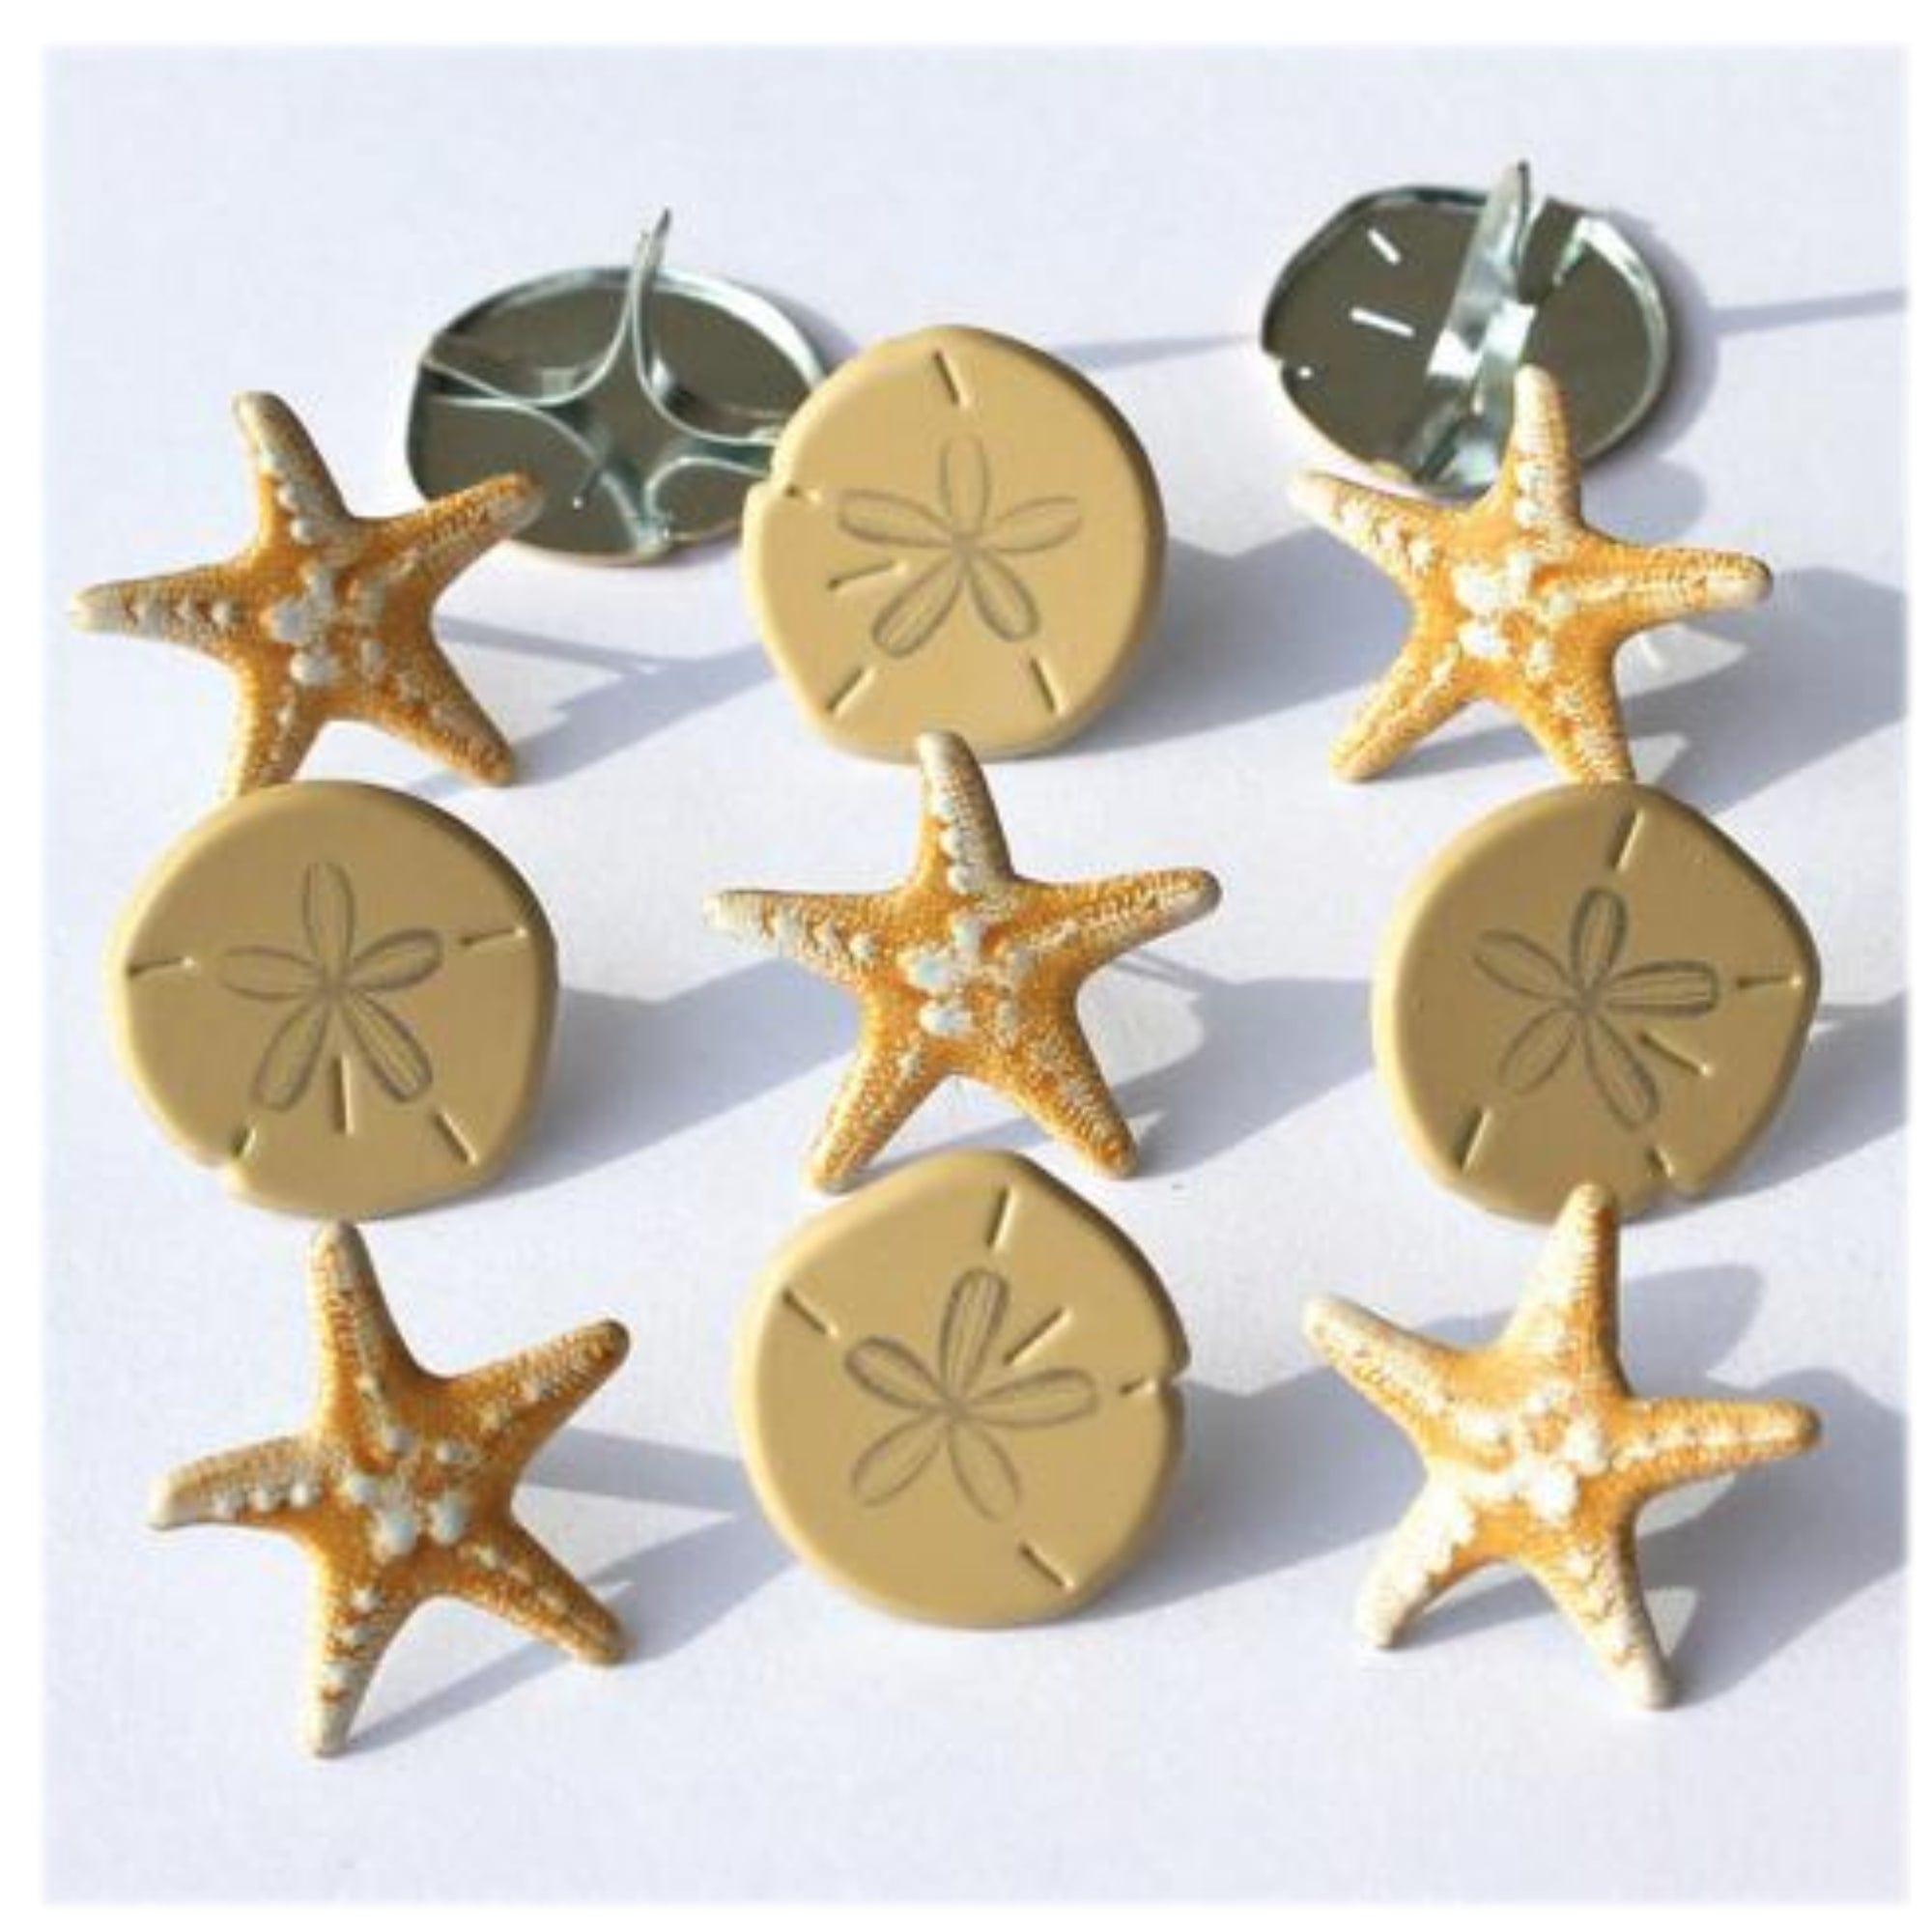 Seashore Shells & Starfish Brads by Eyelet Outlet - Pkg. of 12 - Scrapbook Supply Companies